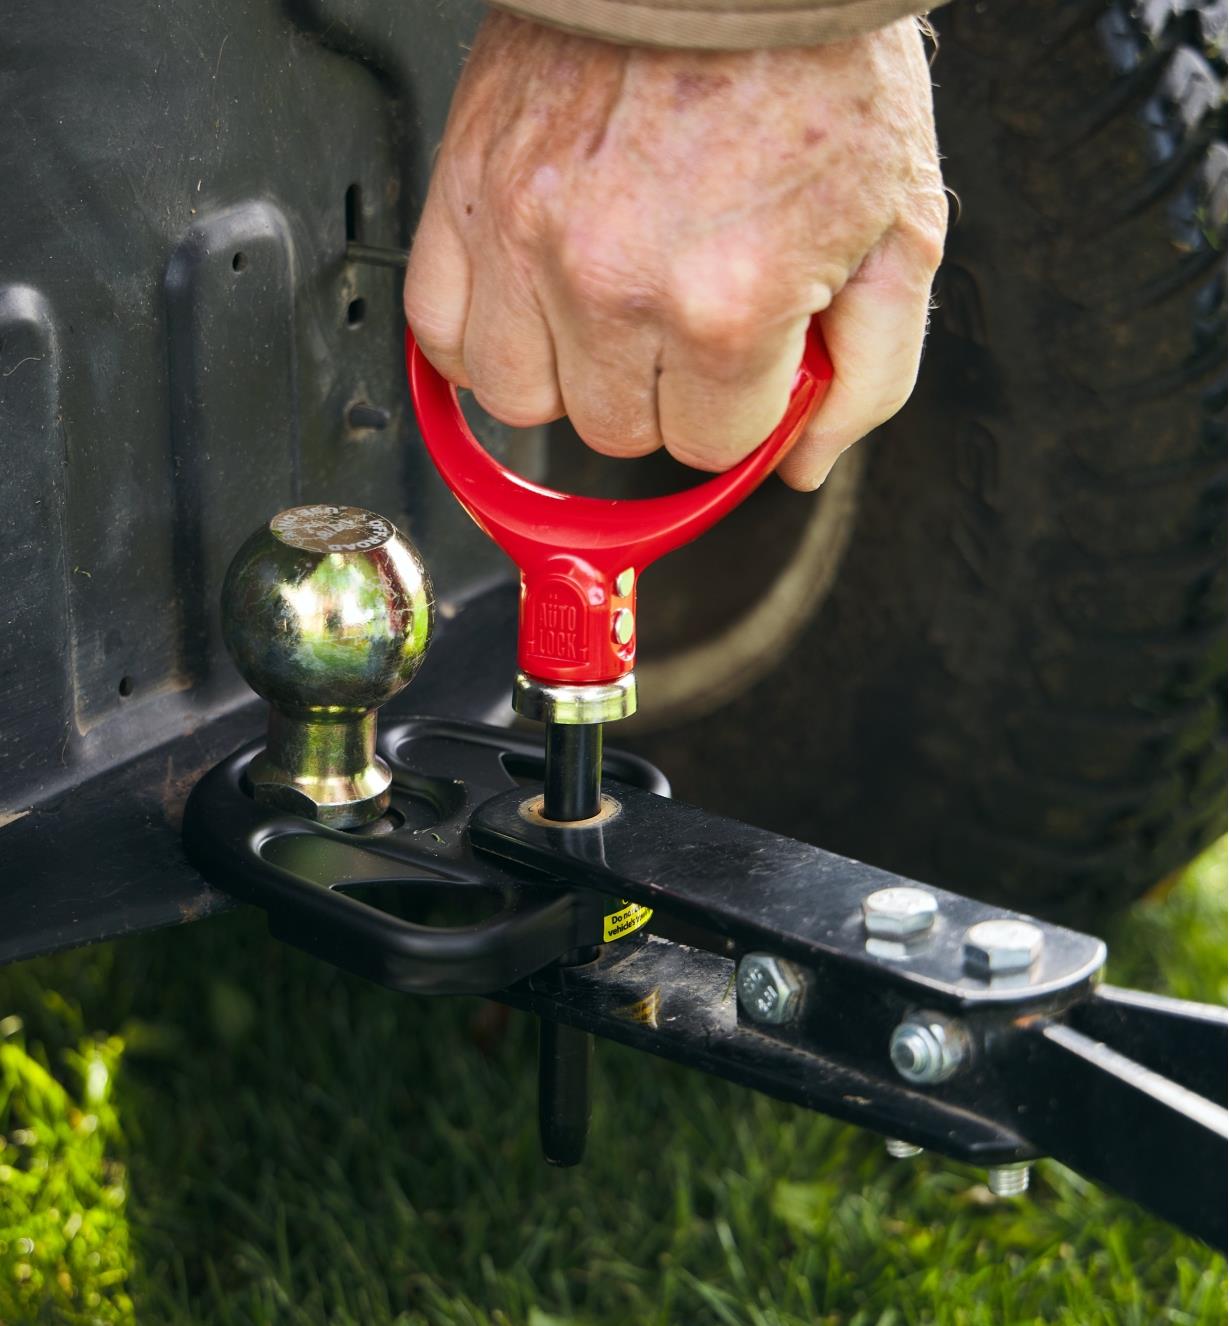 A magnetic hitch pin being removed from a trailer hitch